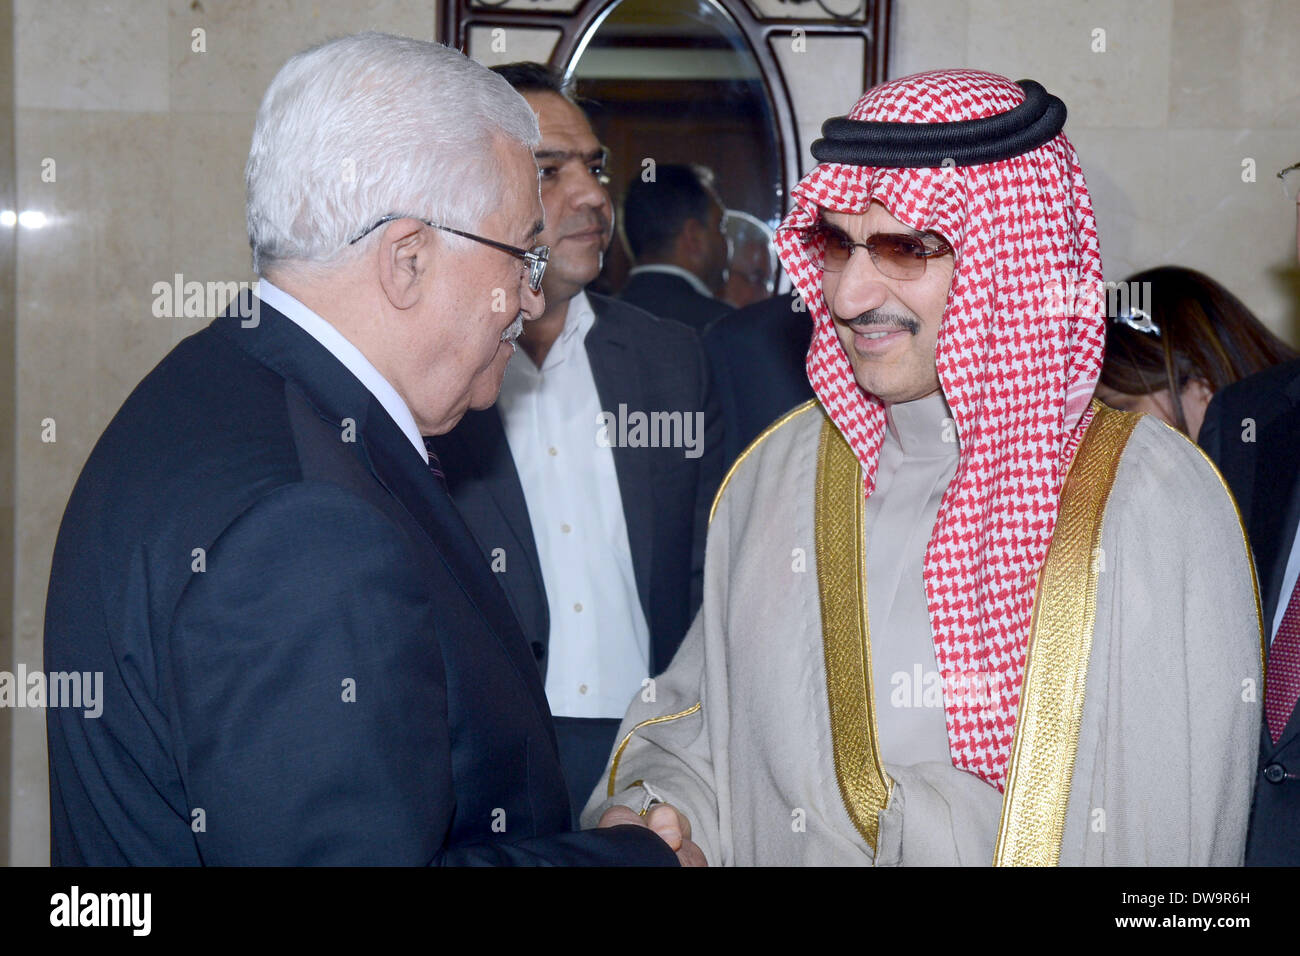 Ramallah, West Bank, Palestinian Territory. 4th Mar, 2014. Palestinian President Mahmud Abbas (R) shakes hands with Saudi Arabia's prince Al-Waleed bin Talal during their meeting in the West Bank city of Ramallah on March 4, 2014 Credit:  Thaer Ganaim/APA Images/ZUMAPRESS.com/Alamy Live News Stock Photo